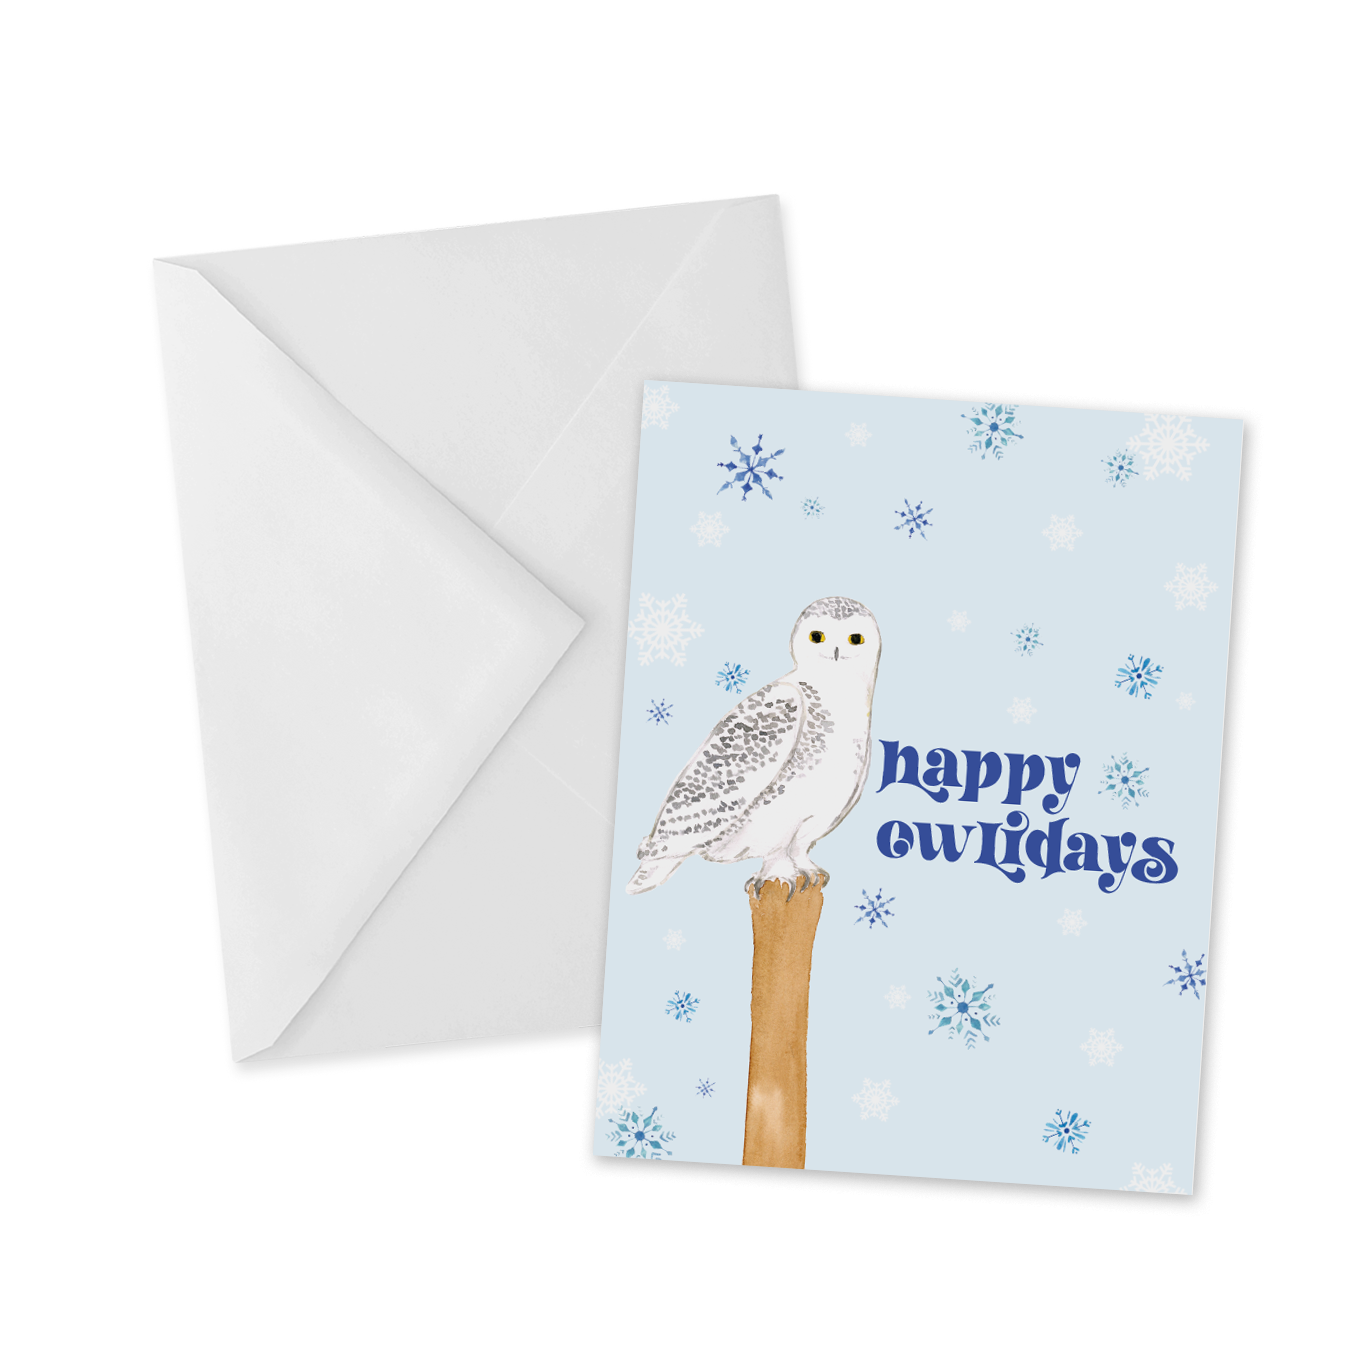 Holiday Animal Greeting Cards, Set of 5 Cards with Envelopes